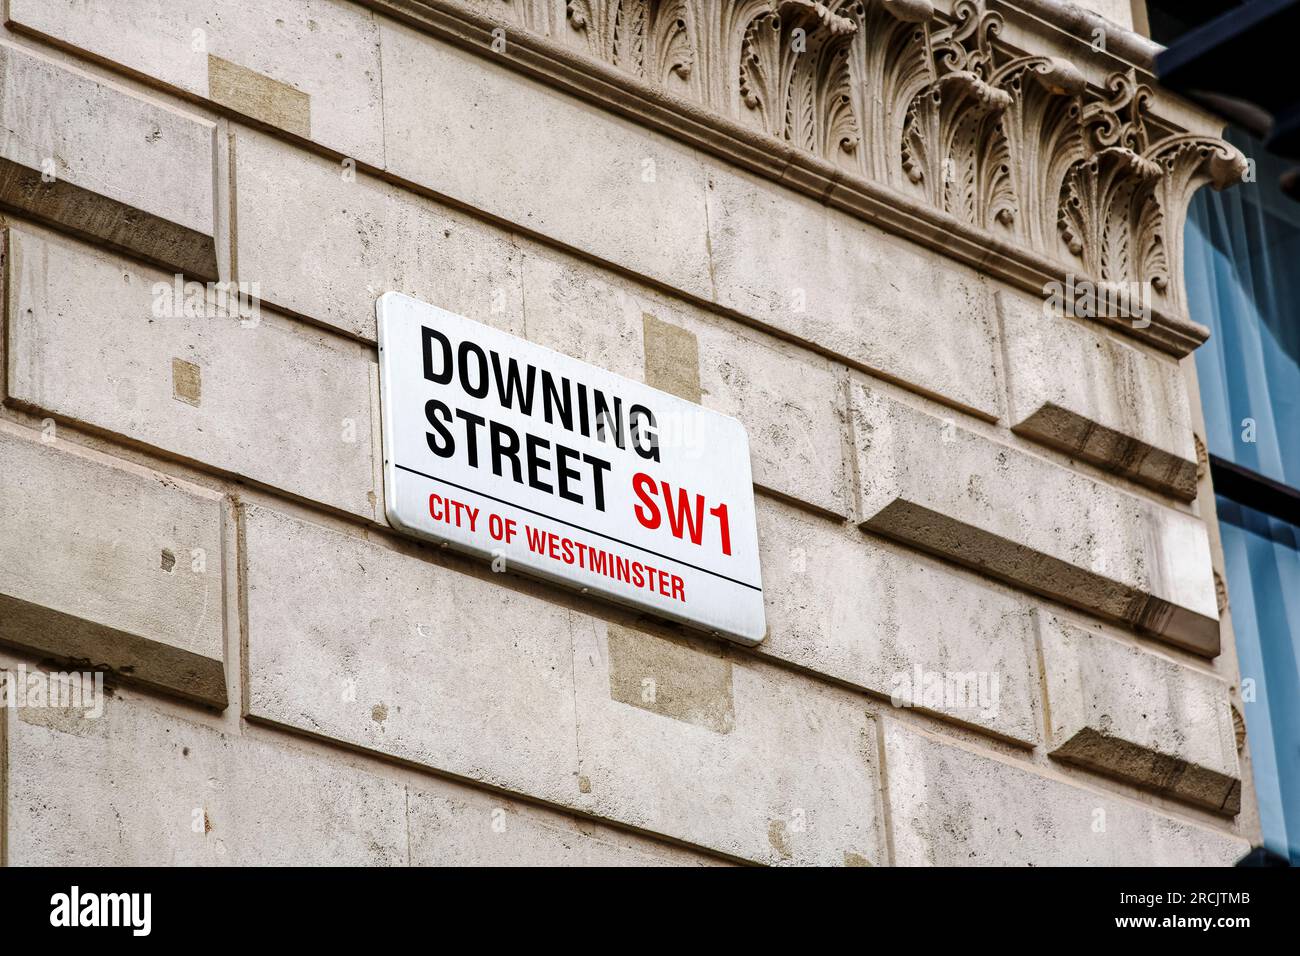 Downing Street and Whitehall, street sign, city of westminster, London,SW1, England, UK Stock Photo